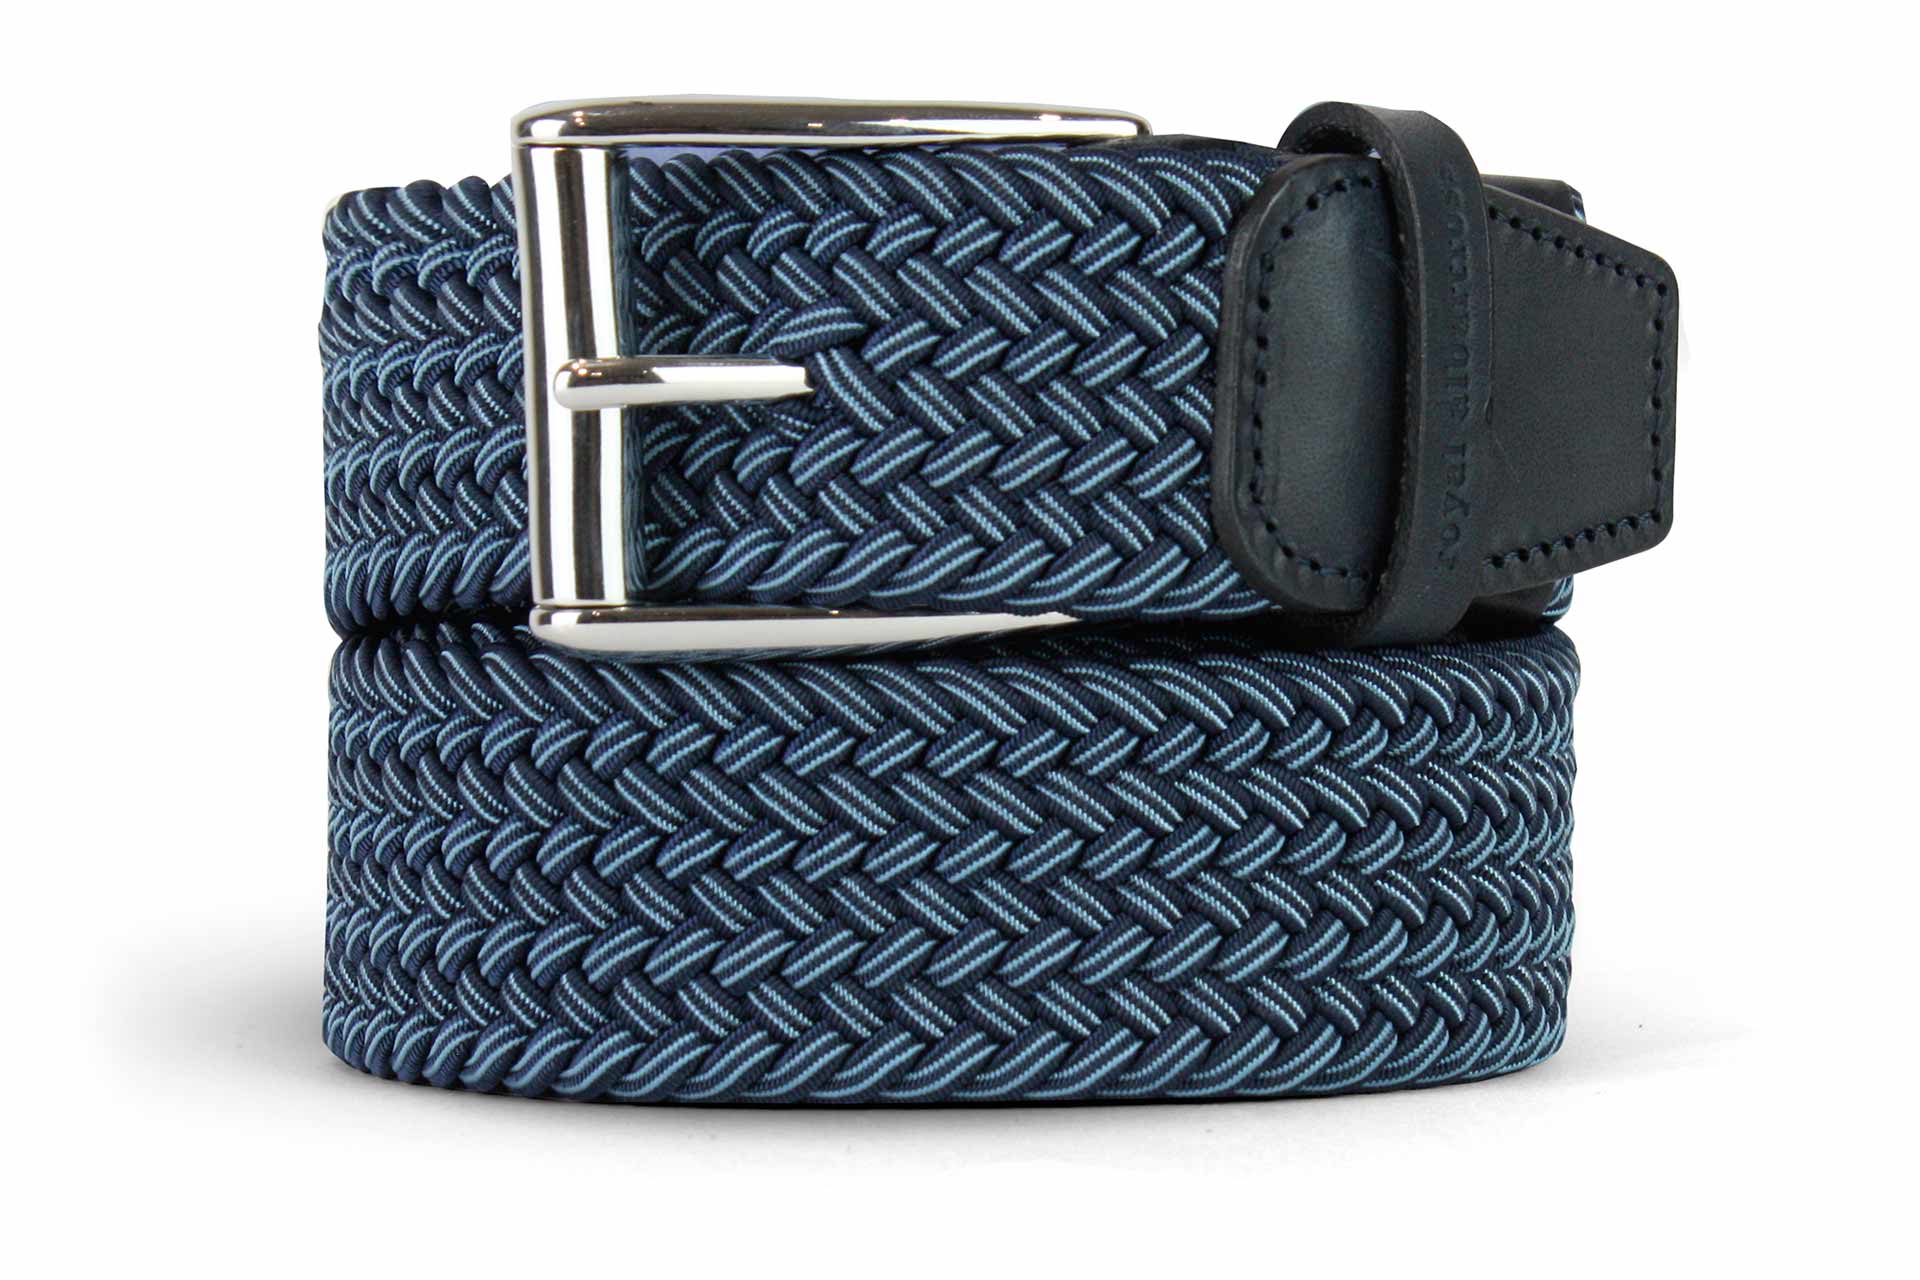 WOVEN - Braided belt - space blue